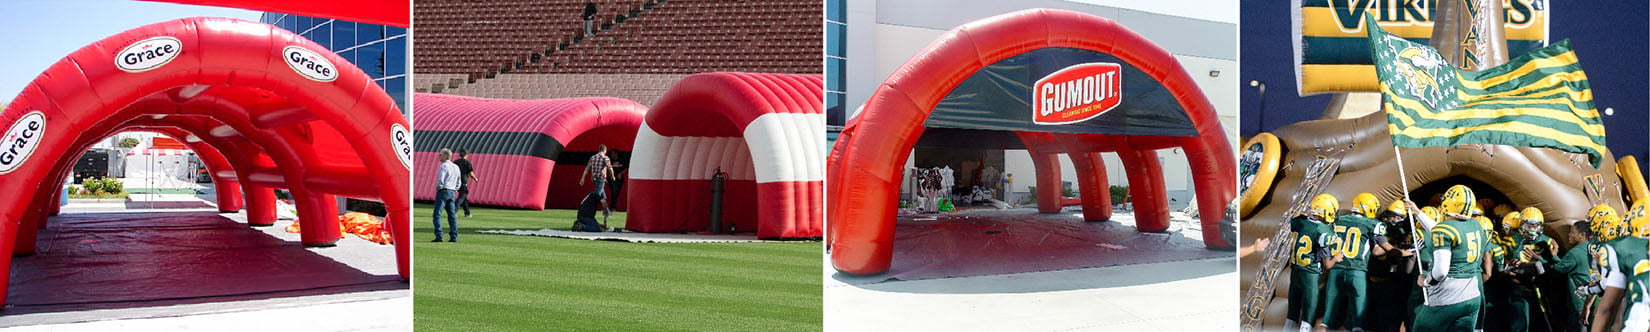 Grace foods, Verizon, T-Mobile, Gumout, High School Viking Ship custom inflatable tunnels collage